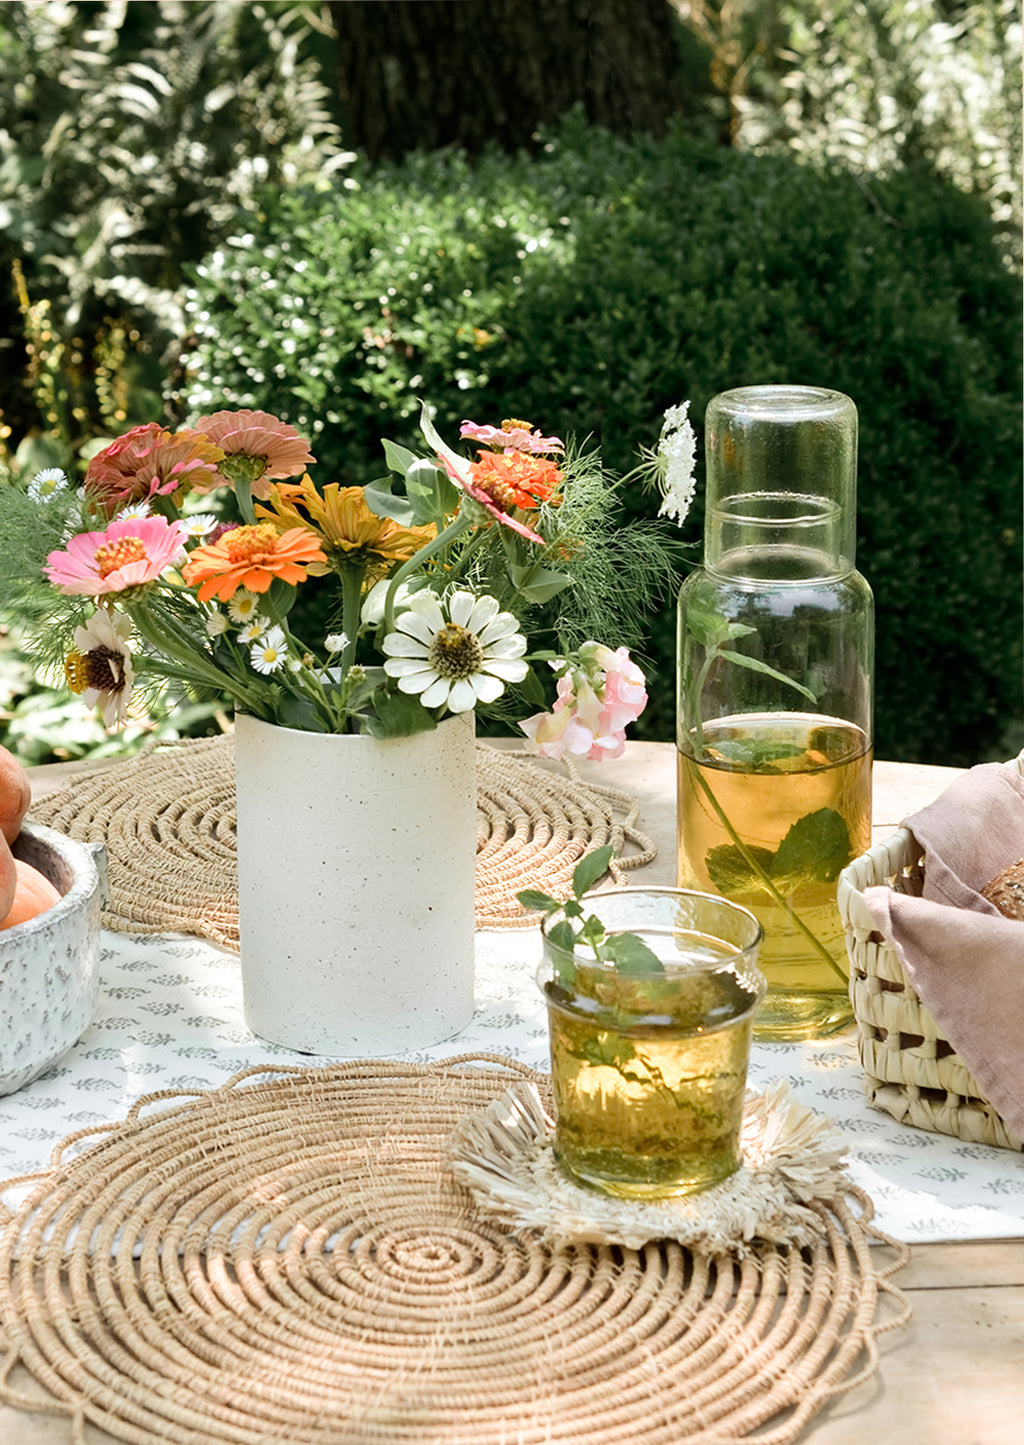 2: A table setting with mint tea in glass decanter.